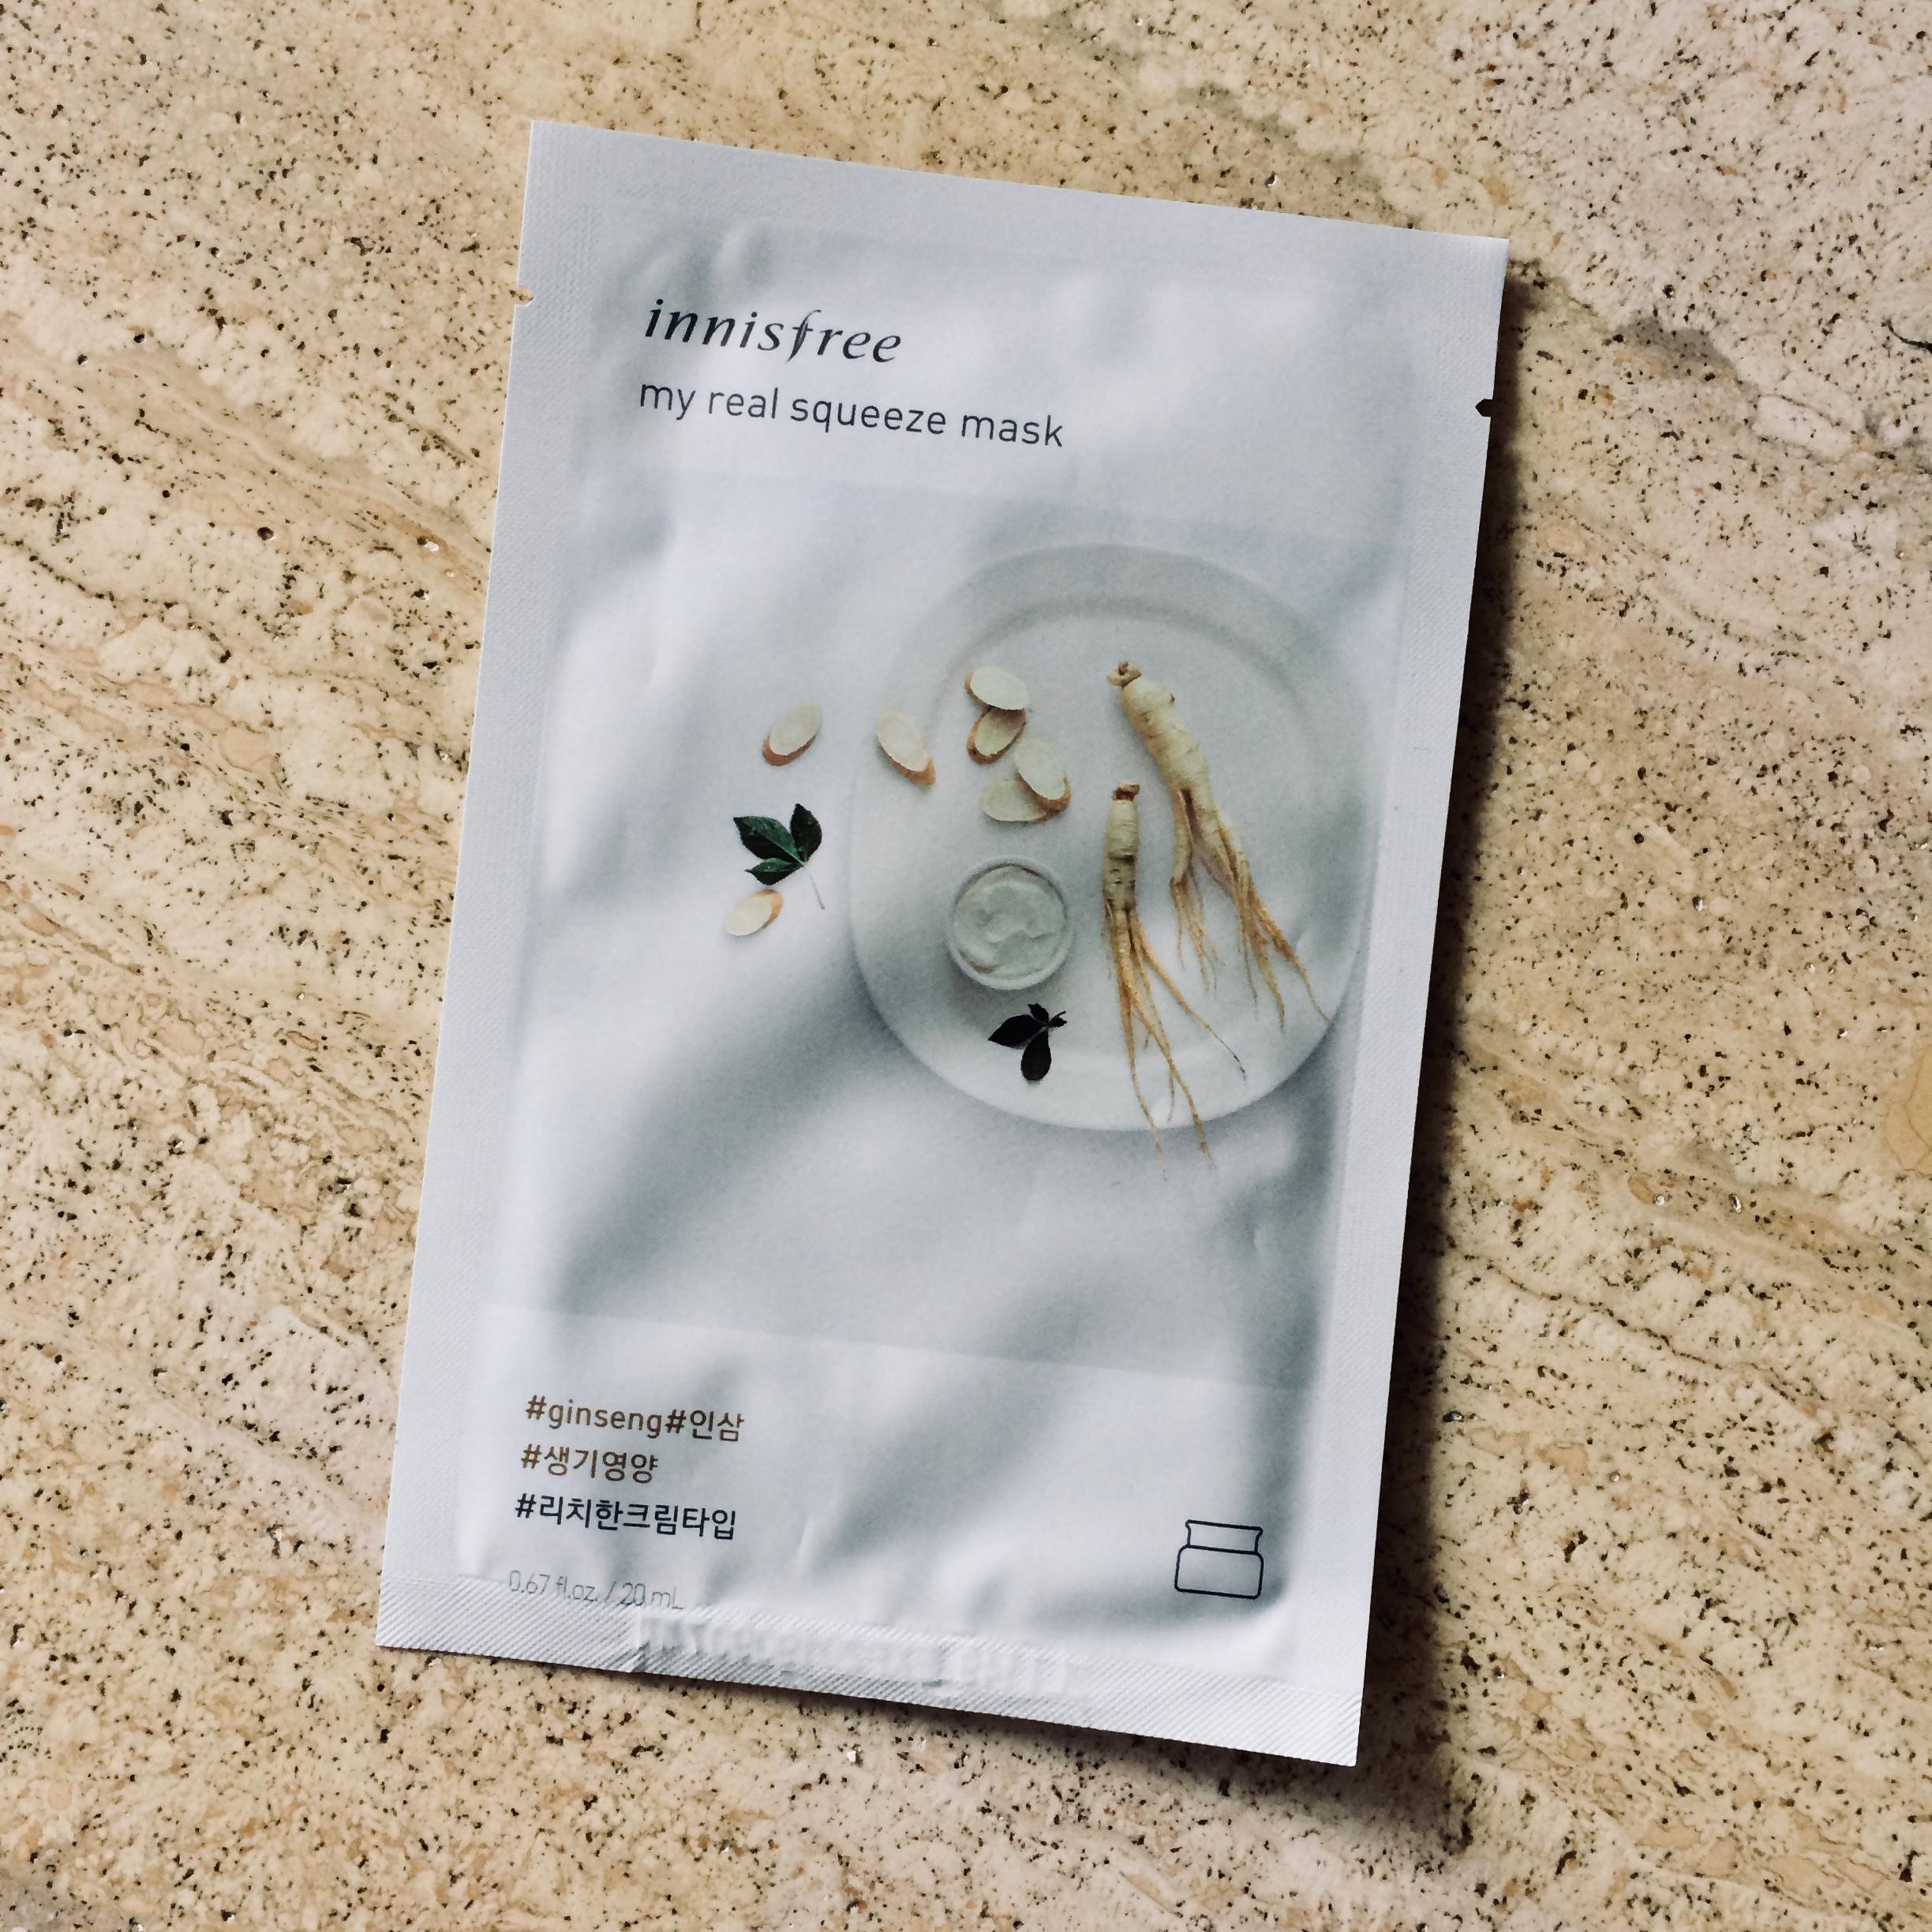 Innisfree My real squeeze mask (Ginseng) – 20ml